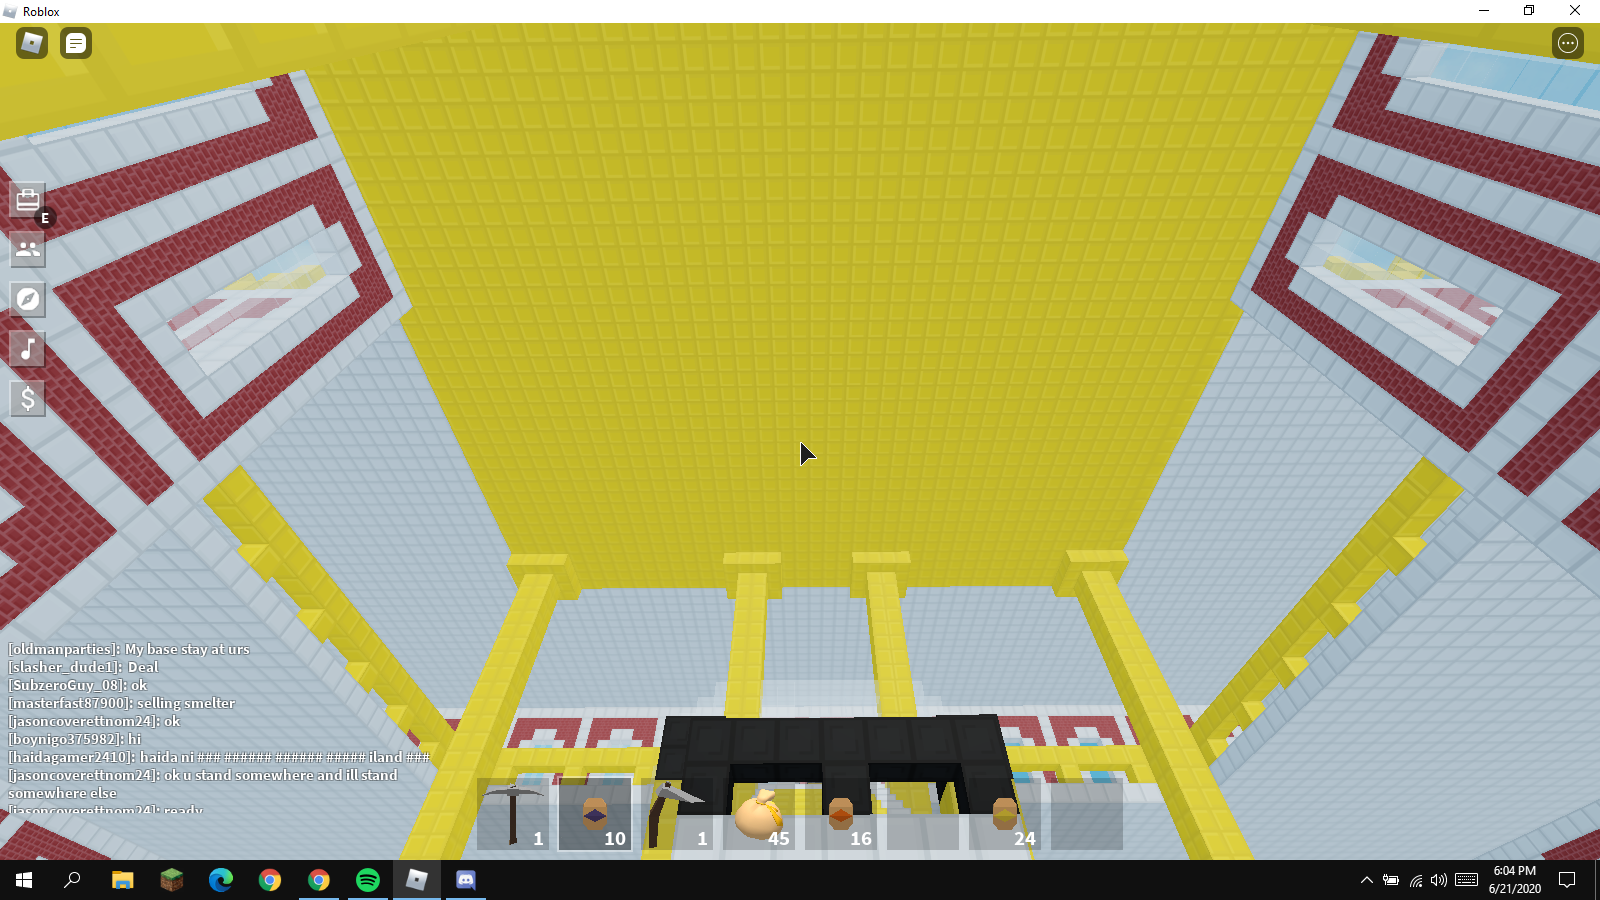 How To Sell Stuff In Skyblock Roblox - skyblock roblox fandom